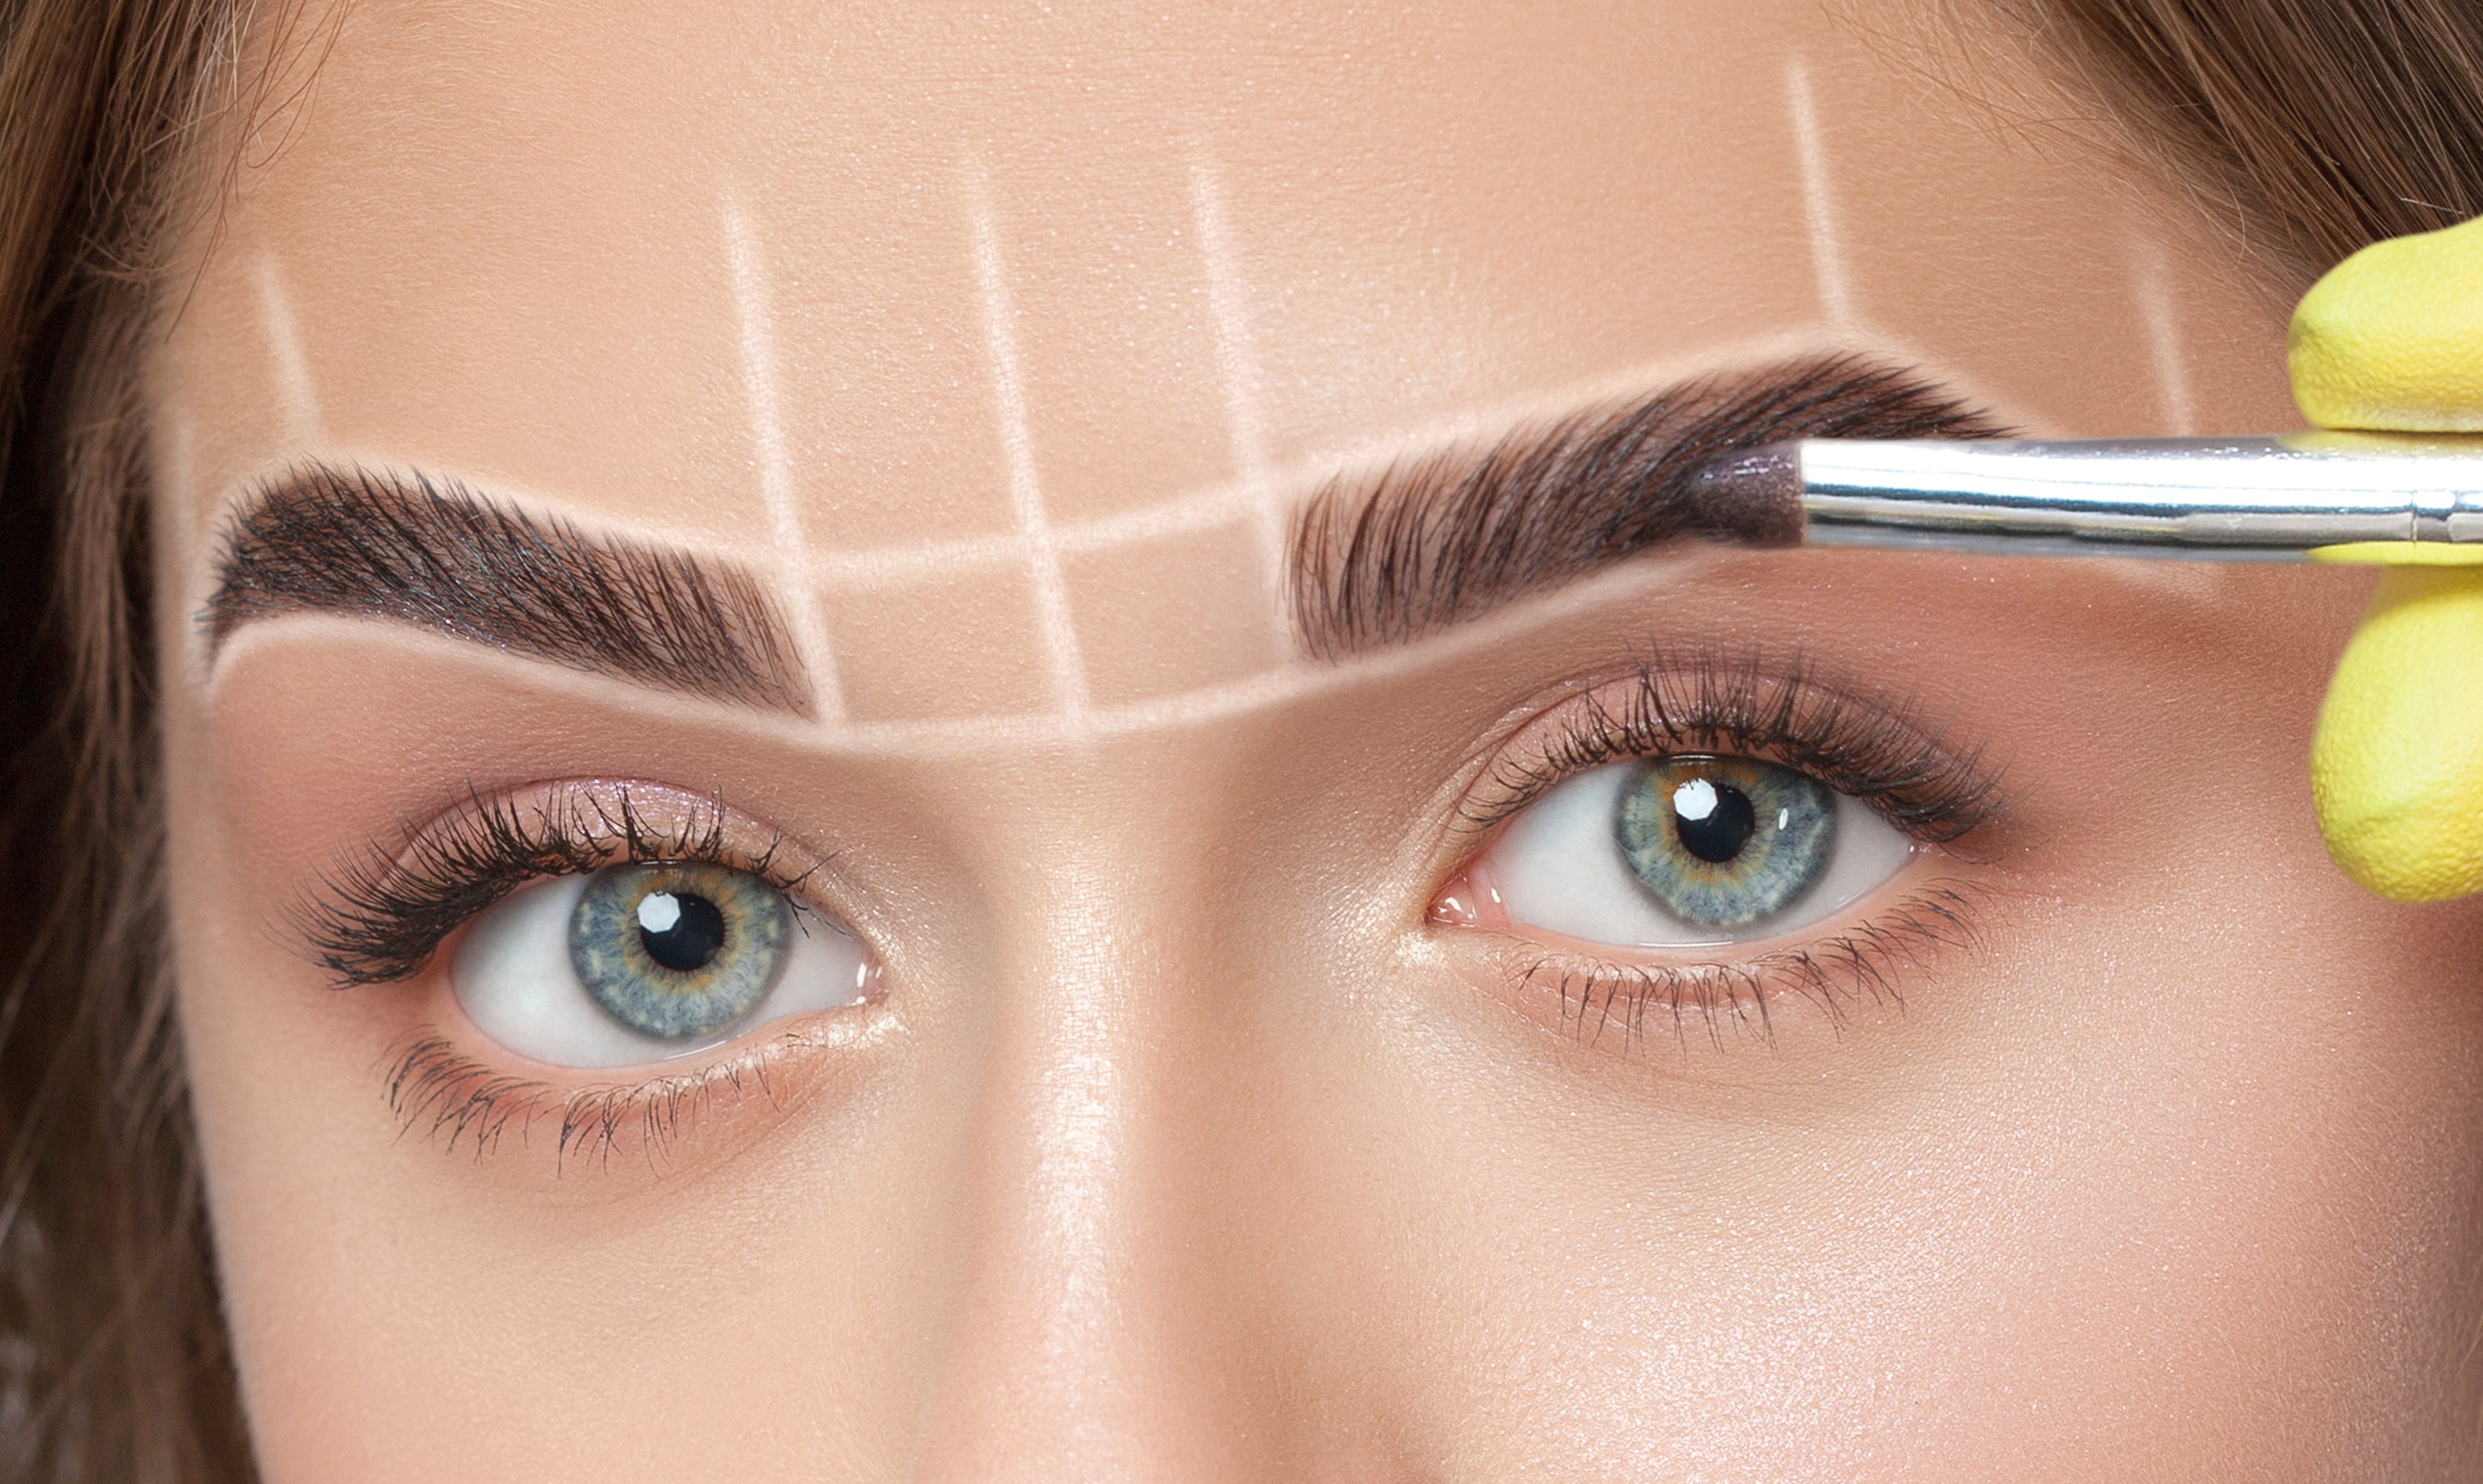 Mapping out the desired eyebrow shape before microblading or ombré shading | Source: Getty Images